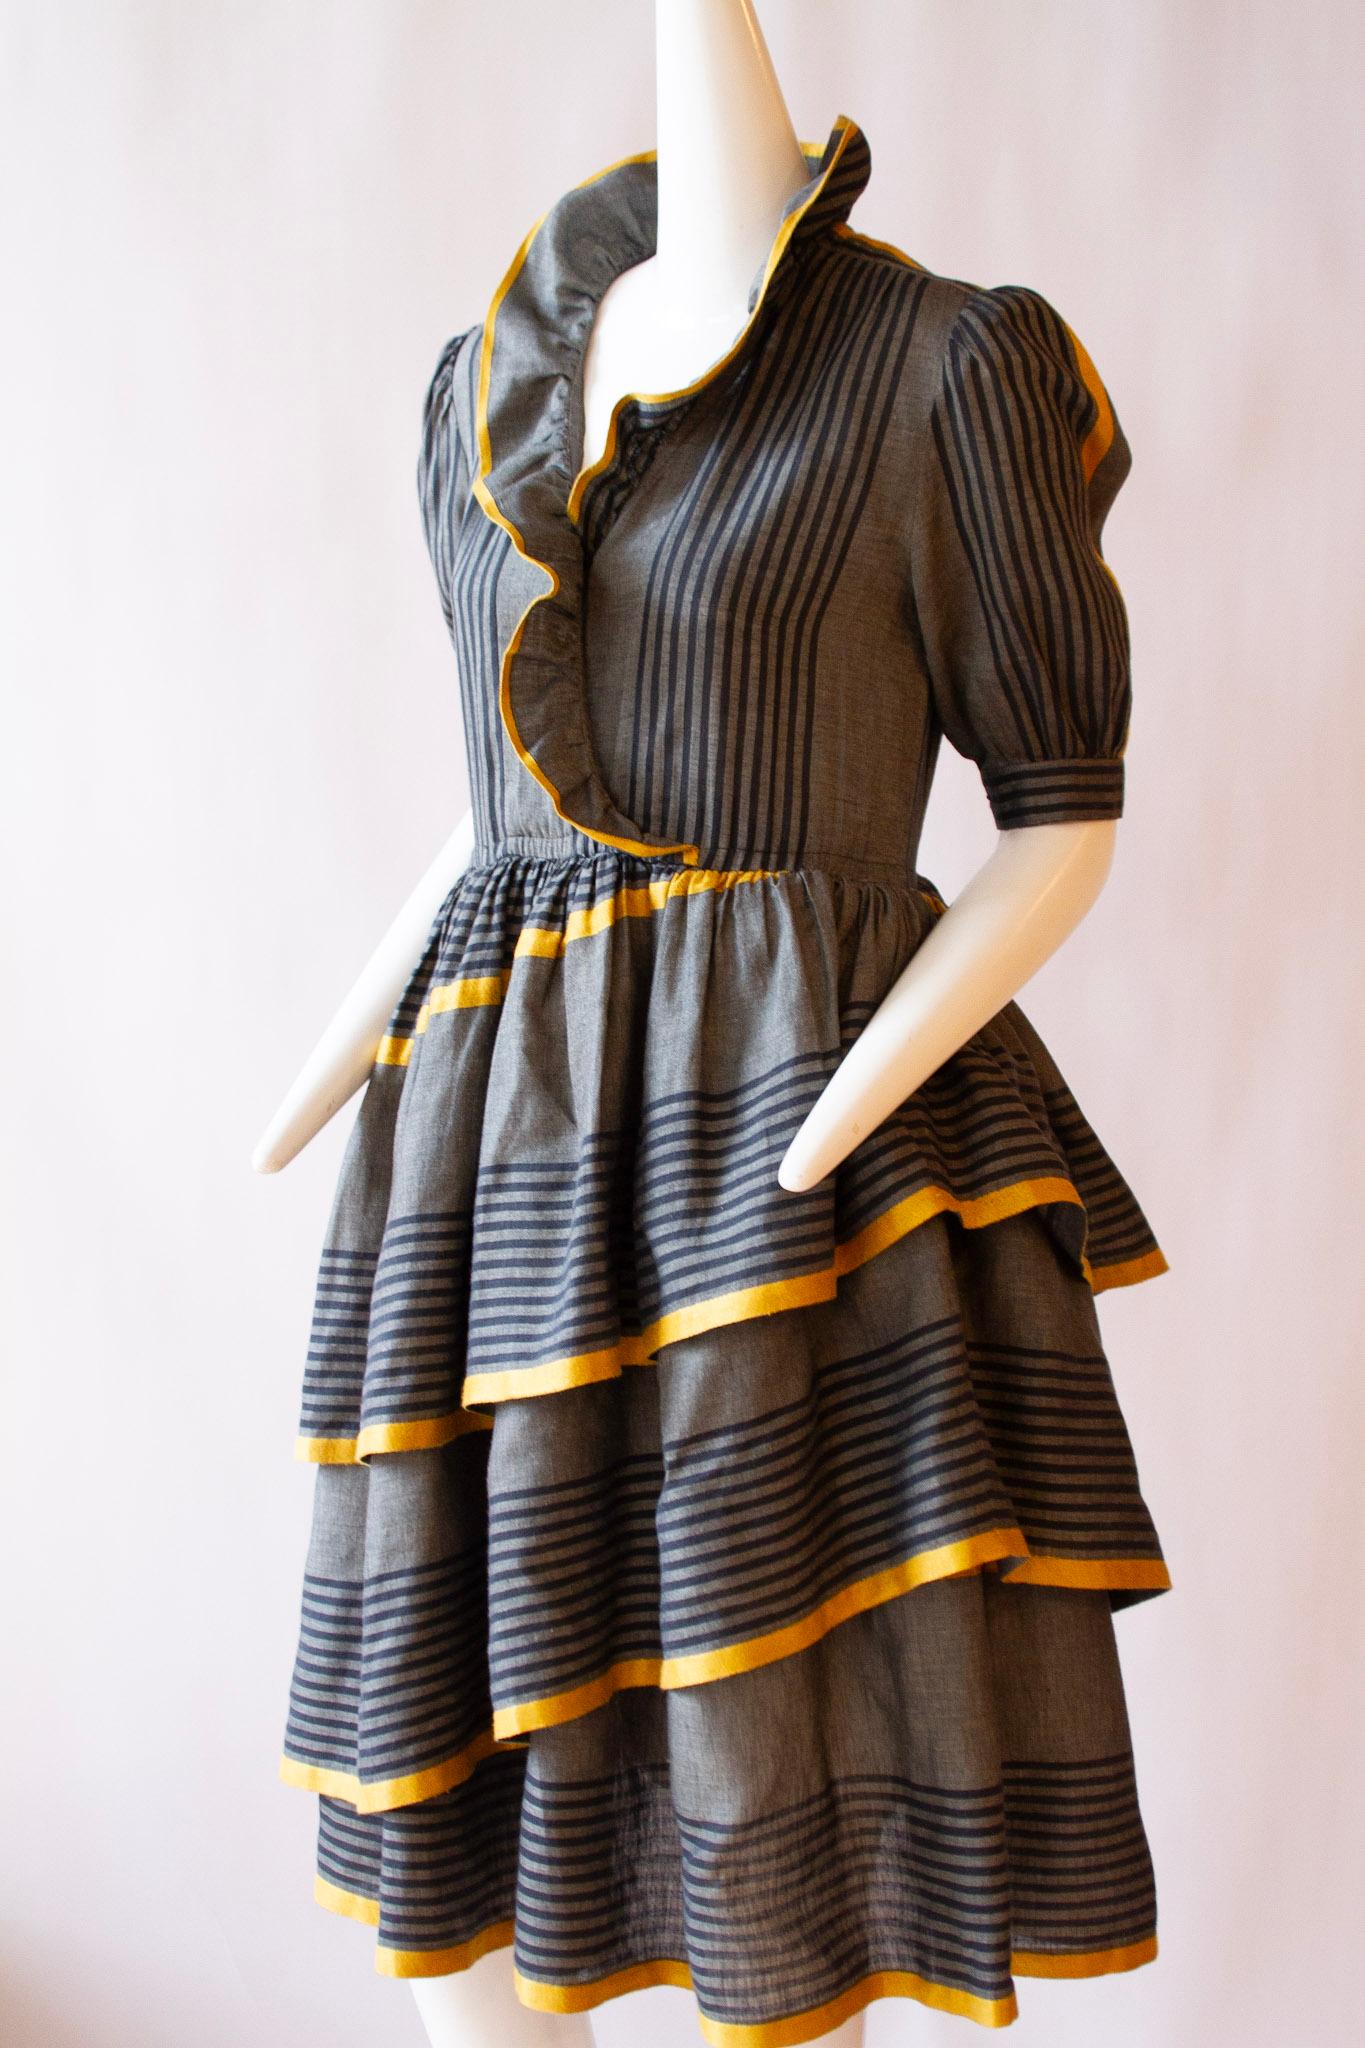 BALENCIAGA Linen and Silk Three Tier Ruffle Dress, c. 1980s In Excellent Condition For Sale In Kingston, NY